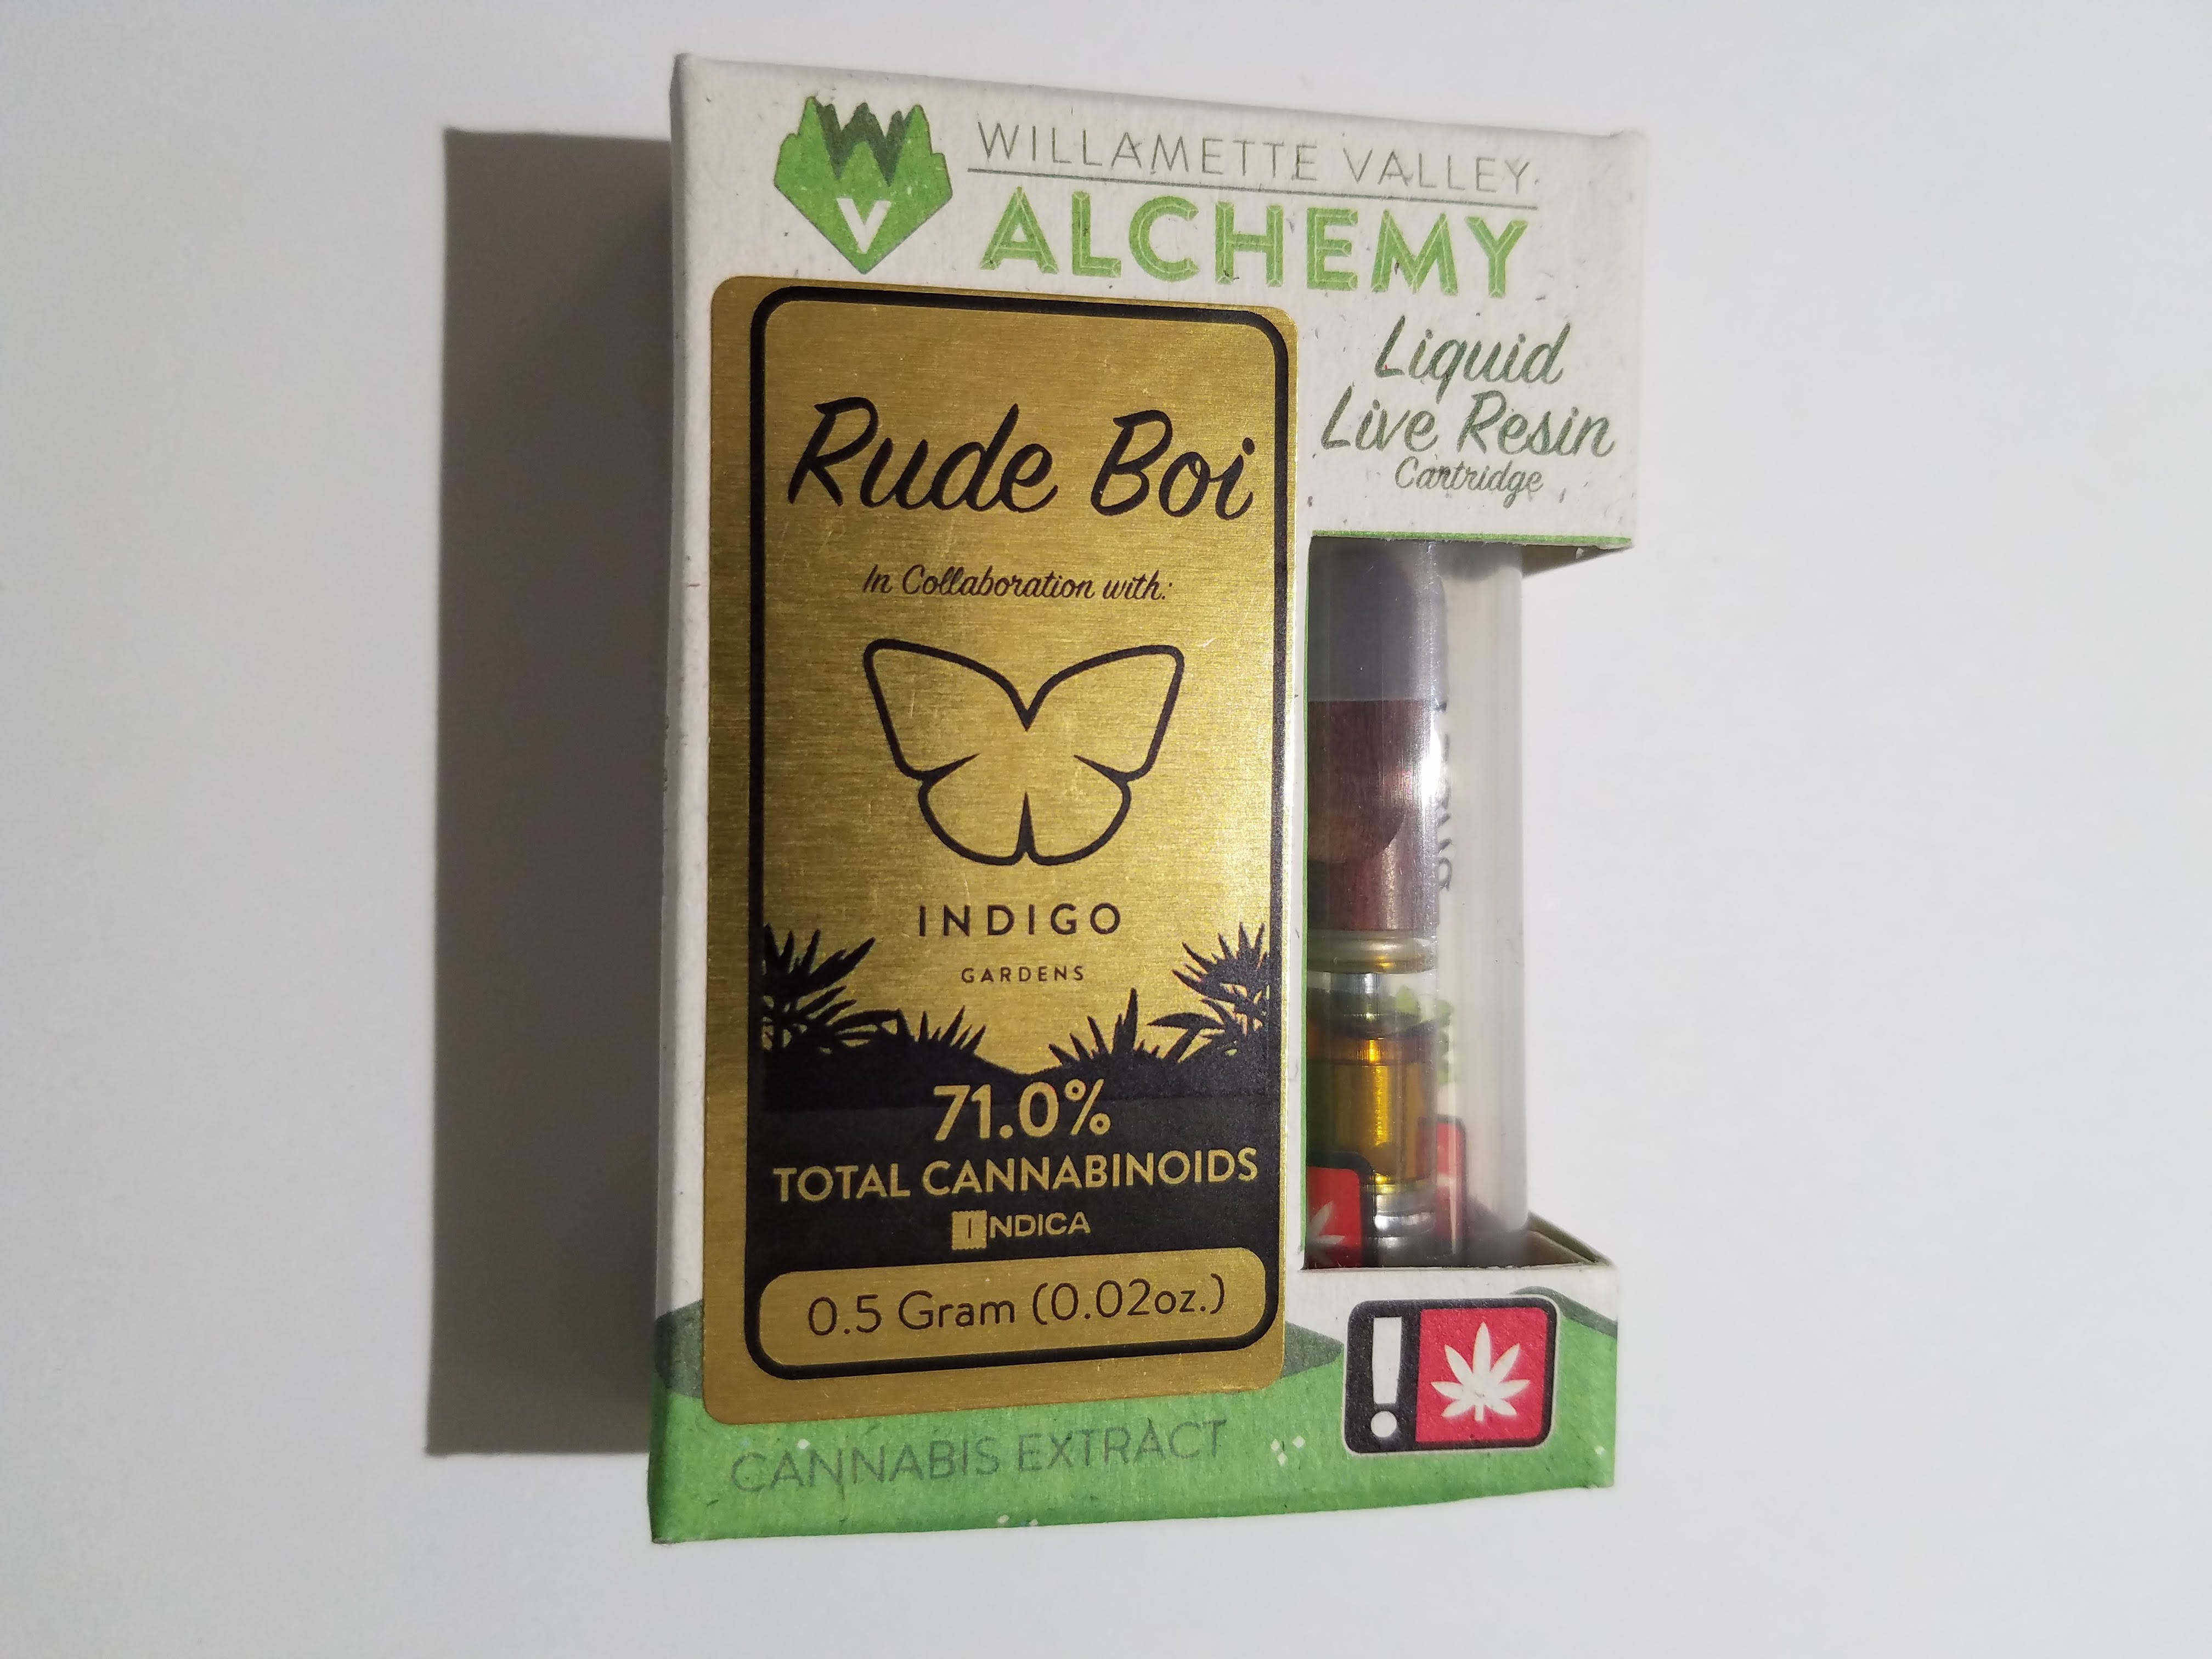 concentrate-5g-rude-boi-live-resin-cartridge-willamette-valley-alchemy